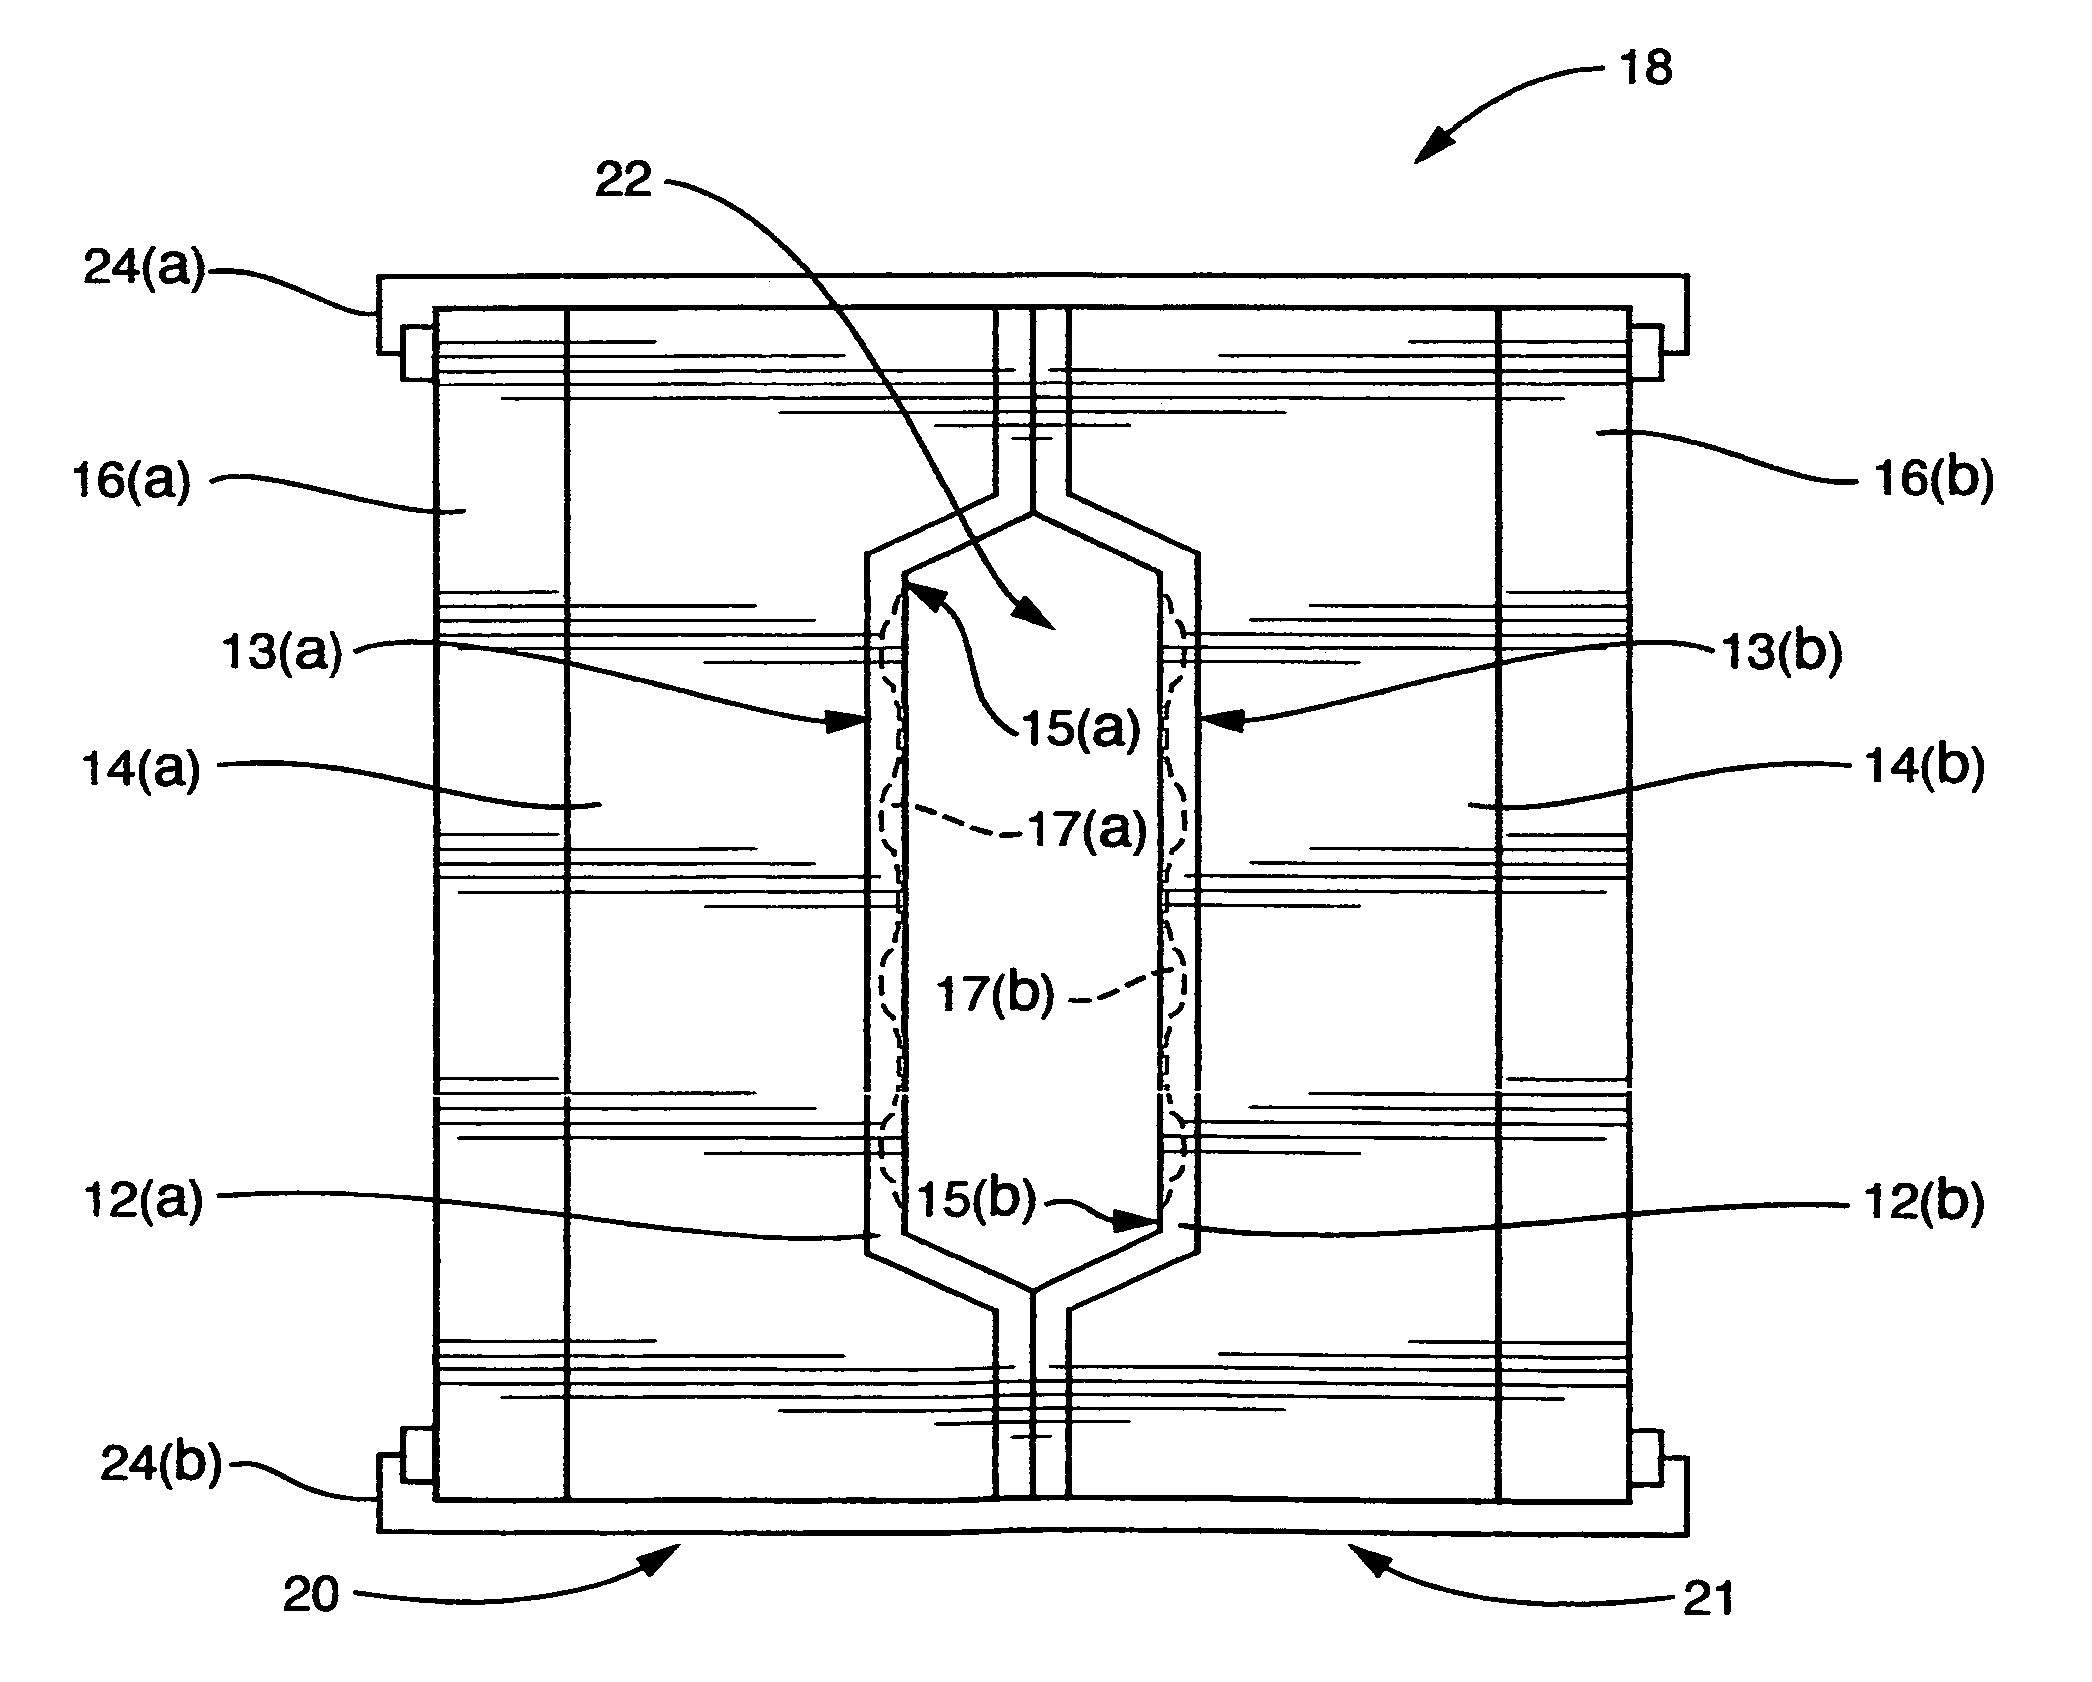 Compound tooling system for molding applications